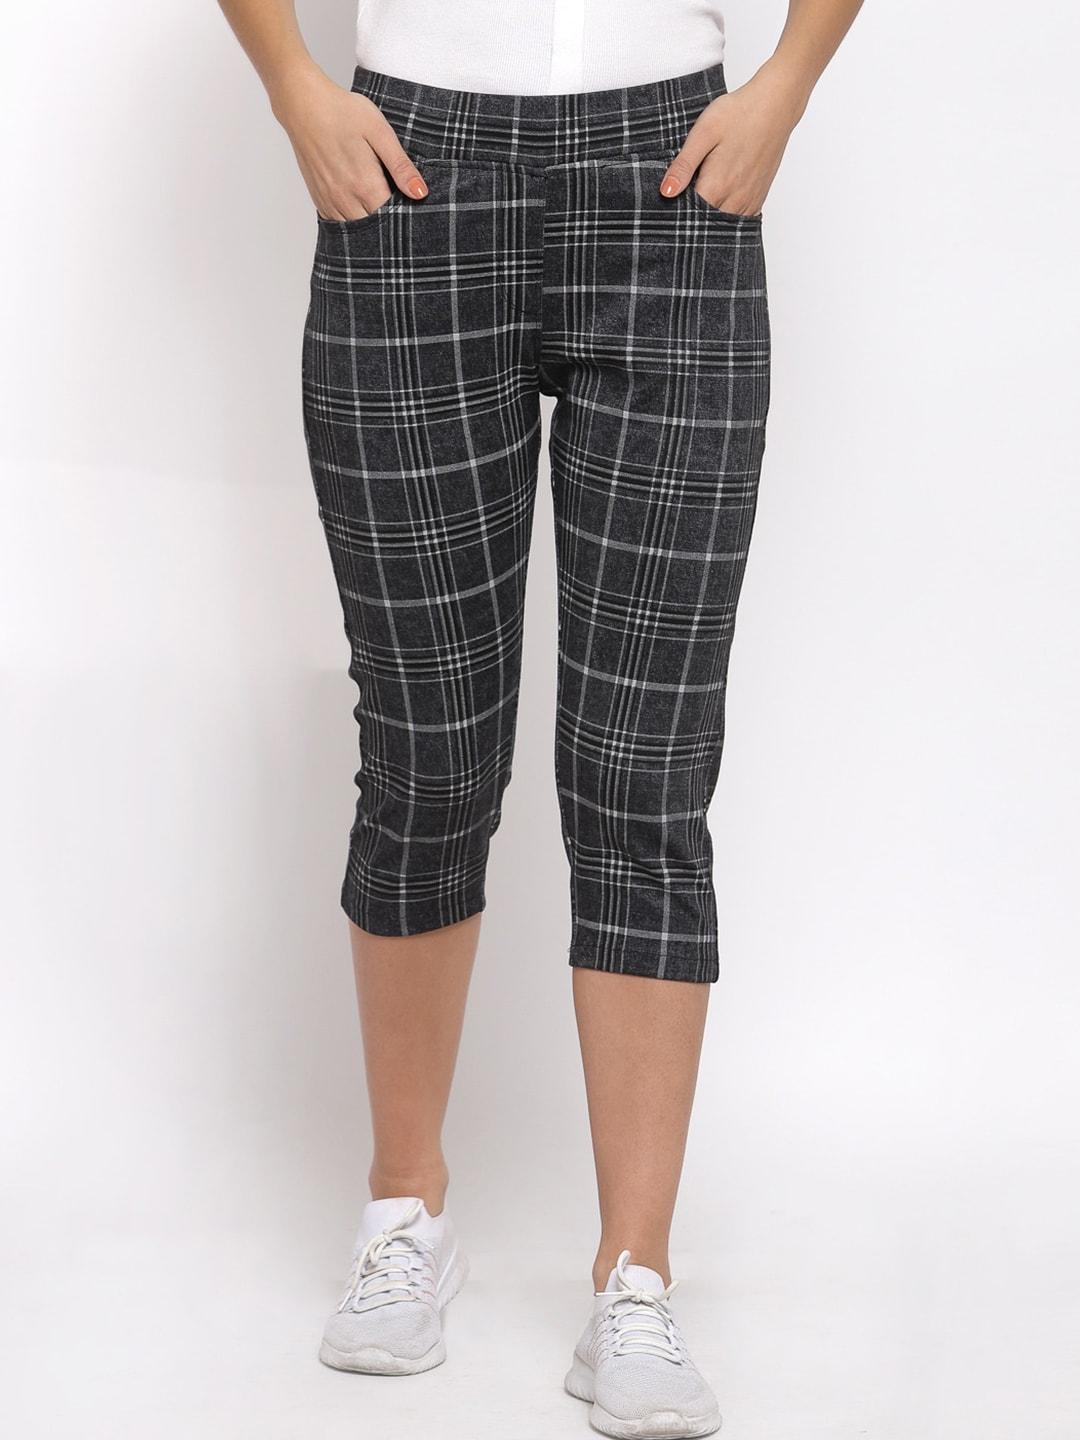 westwood women black & grey checked cotton skinny fit capris